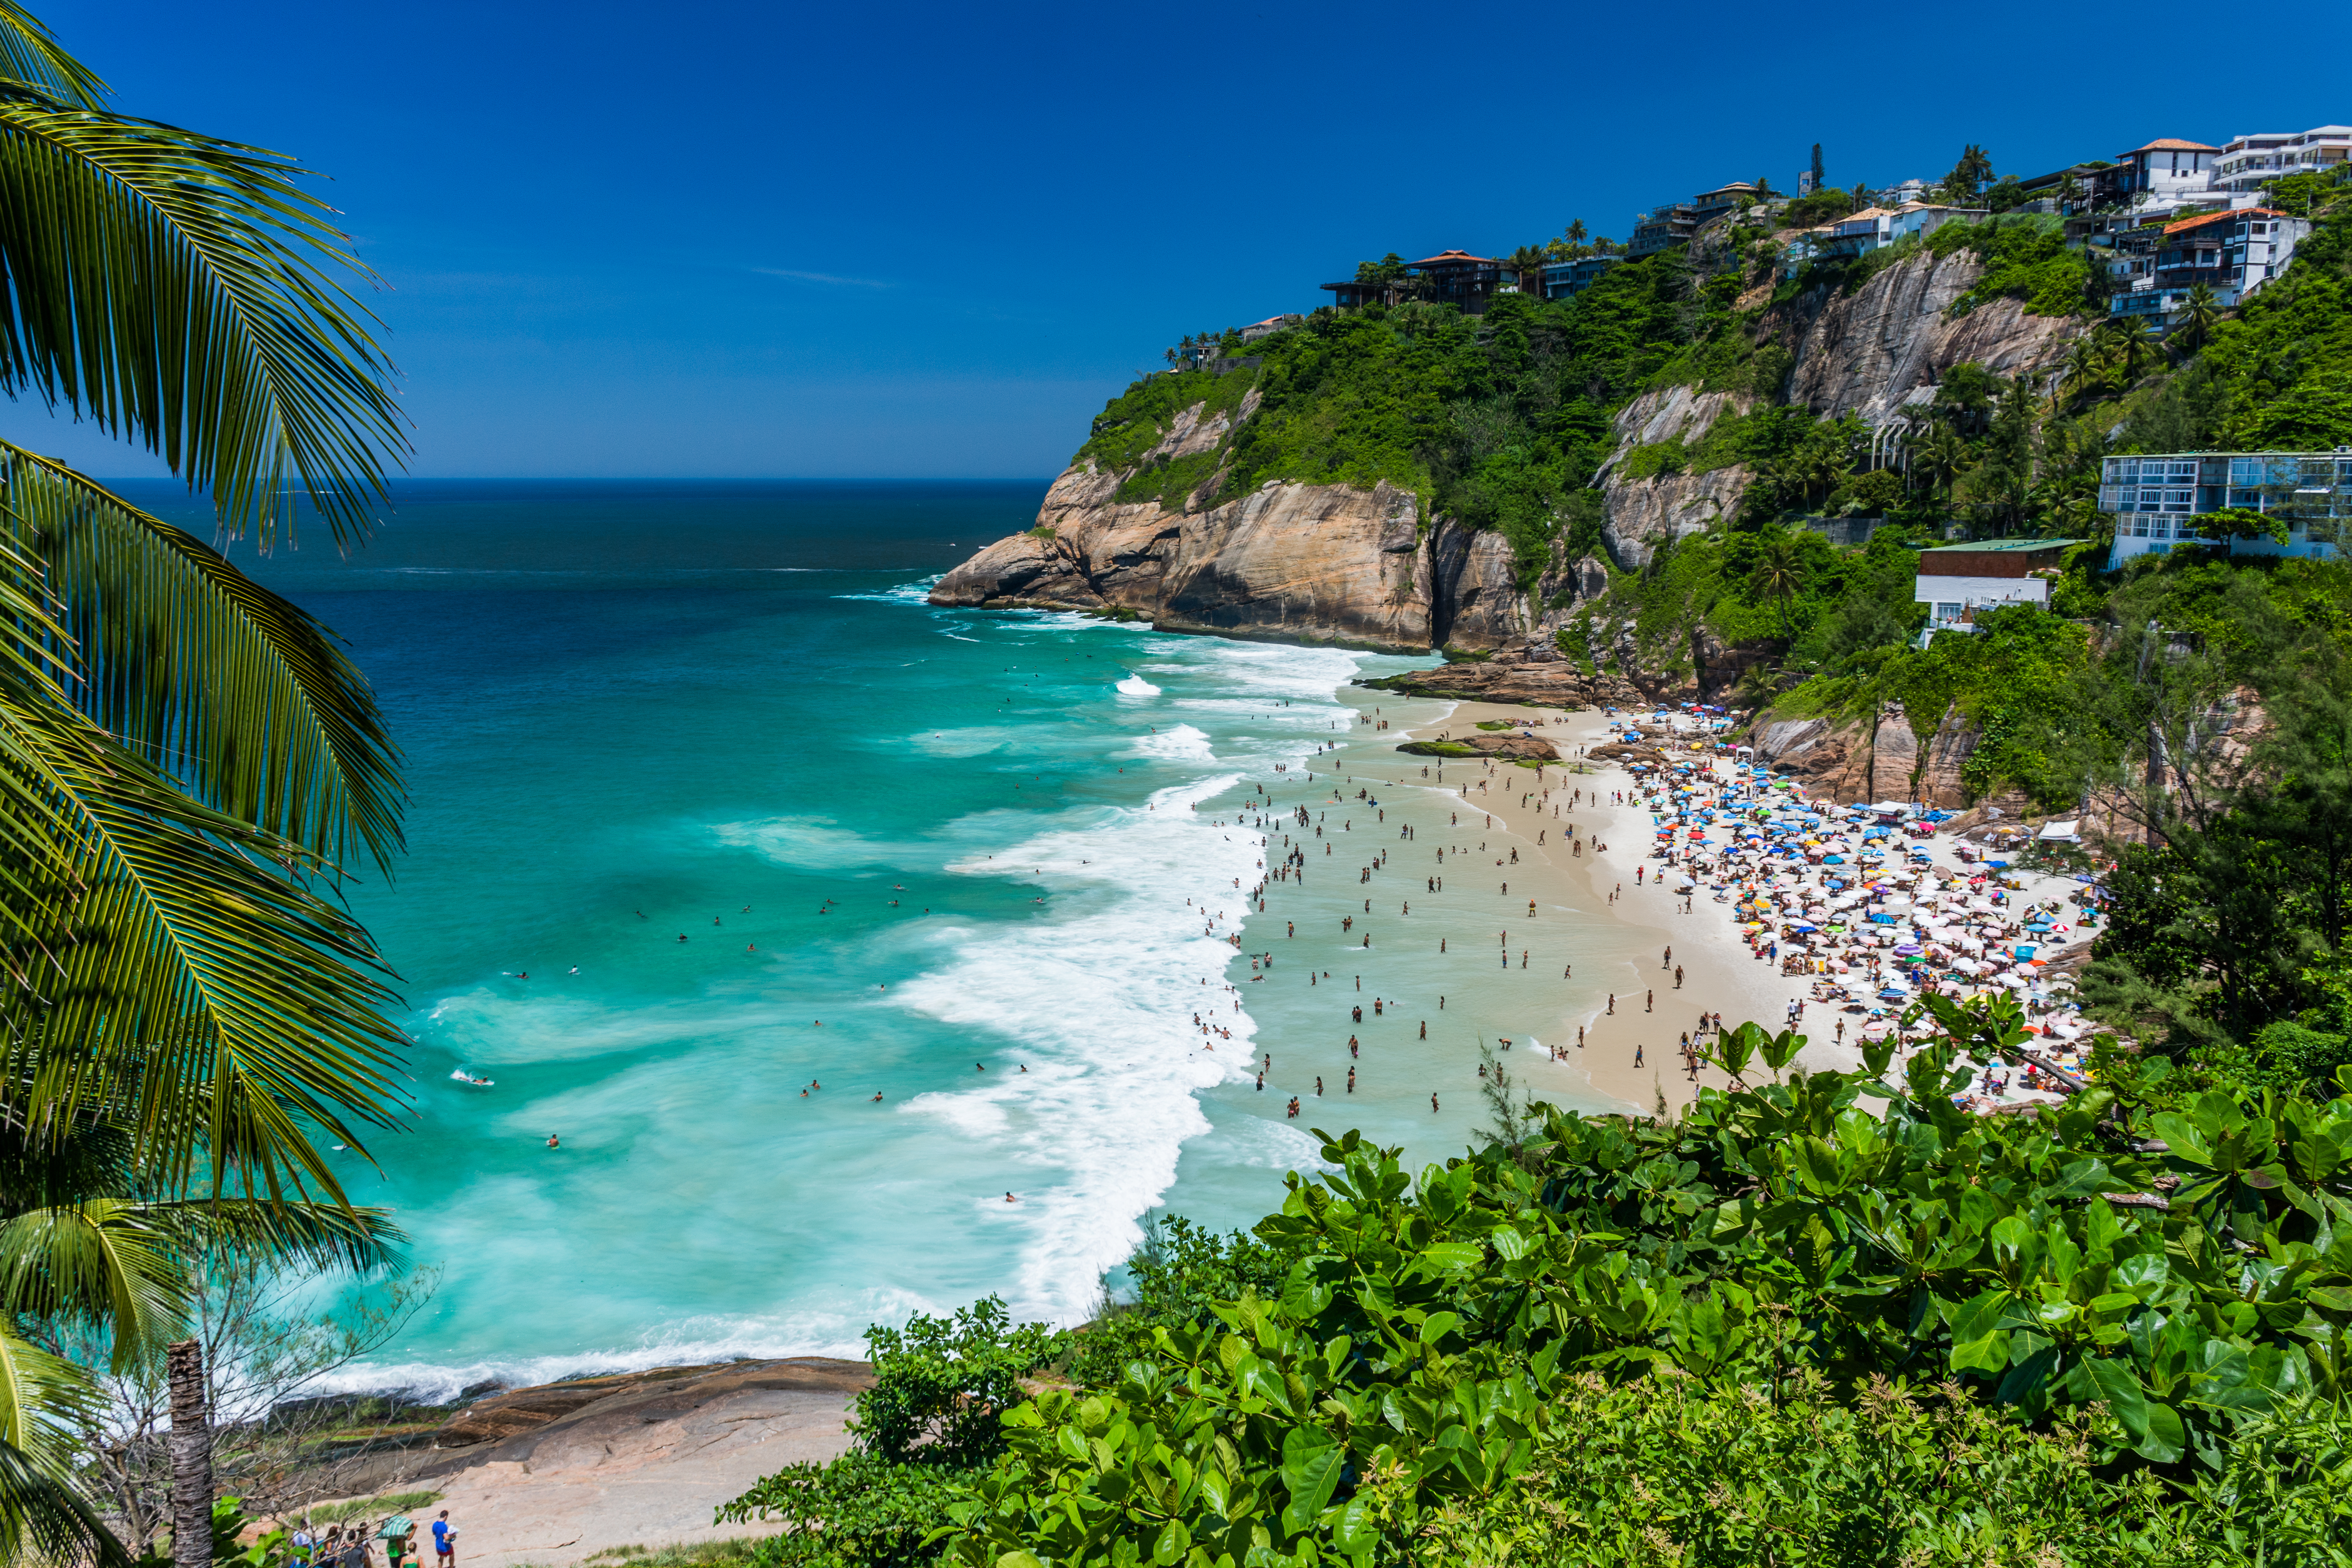 A crowded beach is visible through a gap in the trees. The beach is surrounded by rocky, tree-topped cliffs. Residential buildings dot the cliffs. People are scattered through the water, and appear to be swimming. Gentle foamy waves are visible where the water meets the beach.